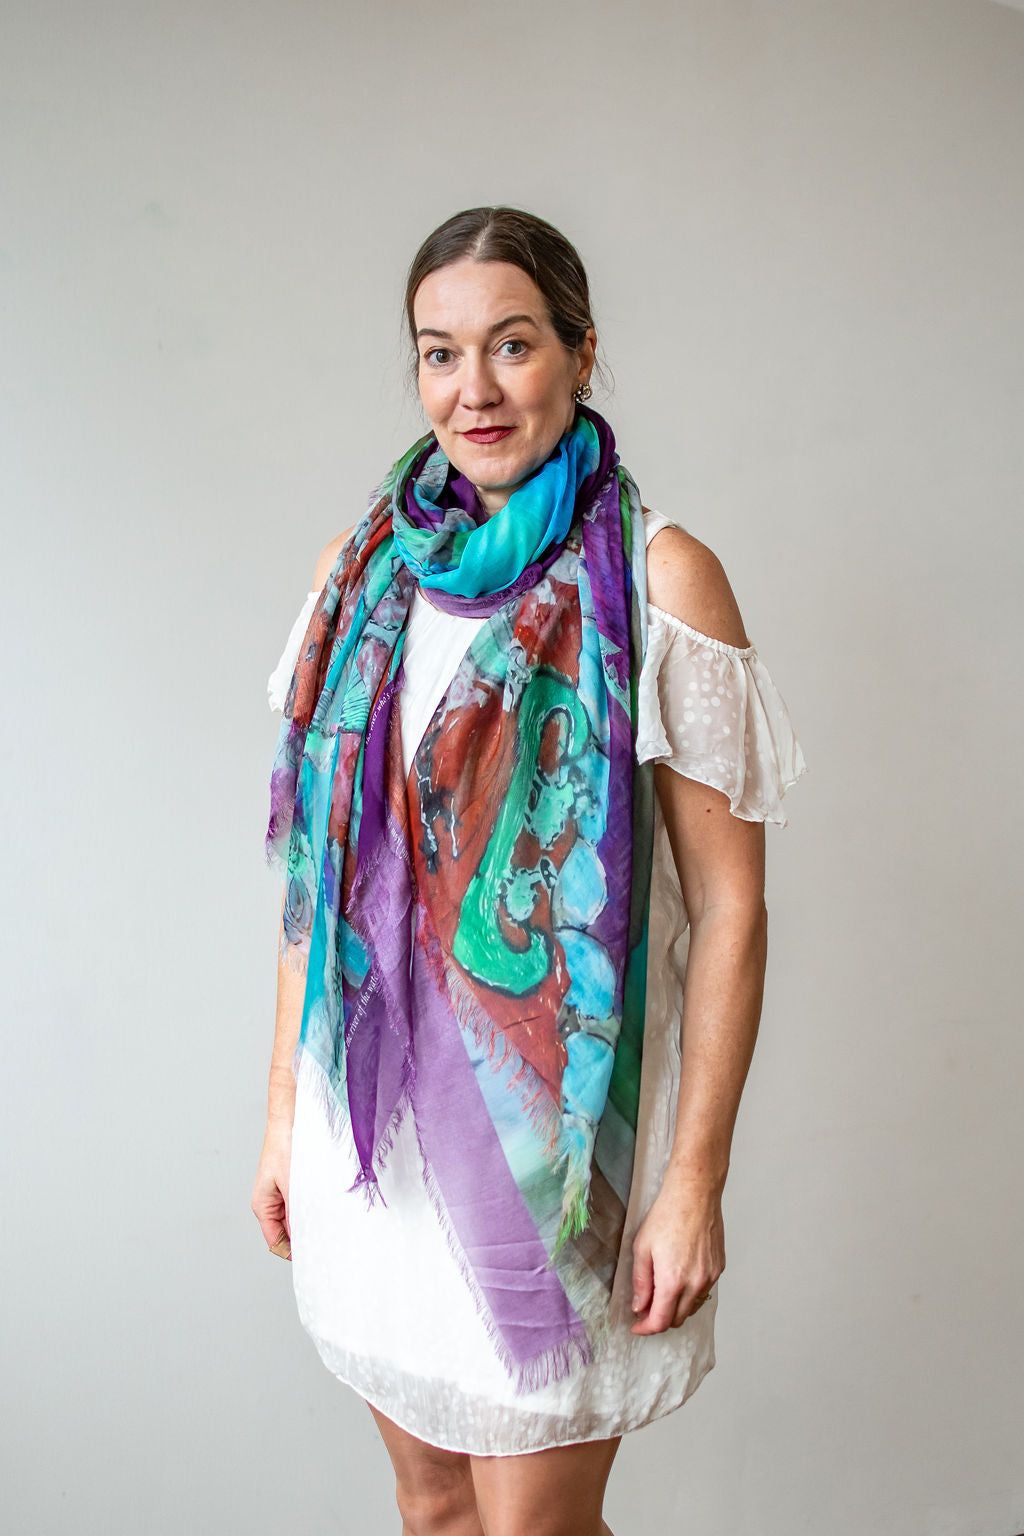 Love's Pure Light "Look at What Is in Your Hand" Silk Scarf - Style D-430, fig2